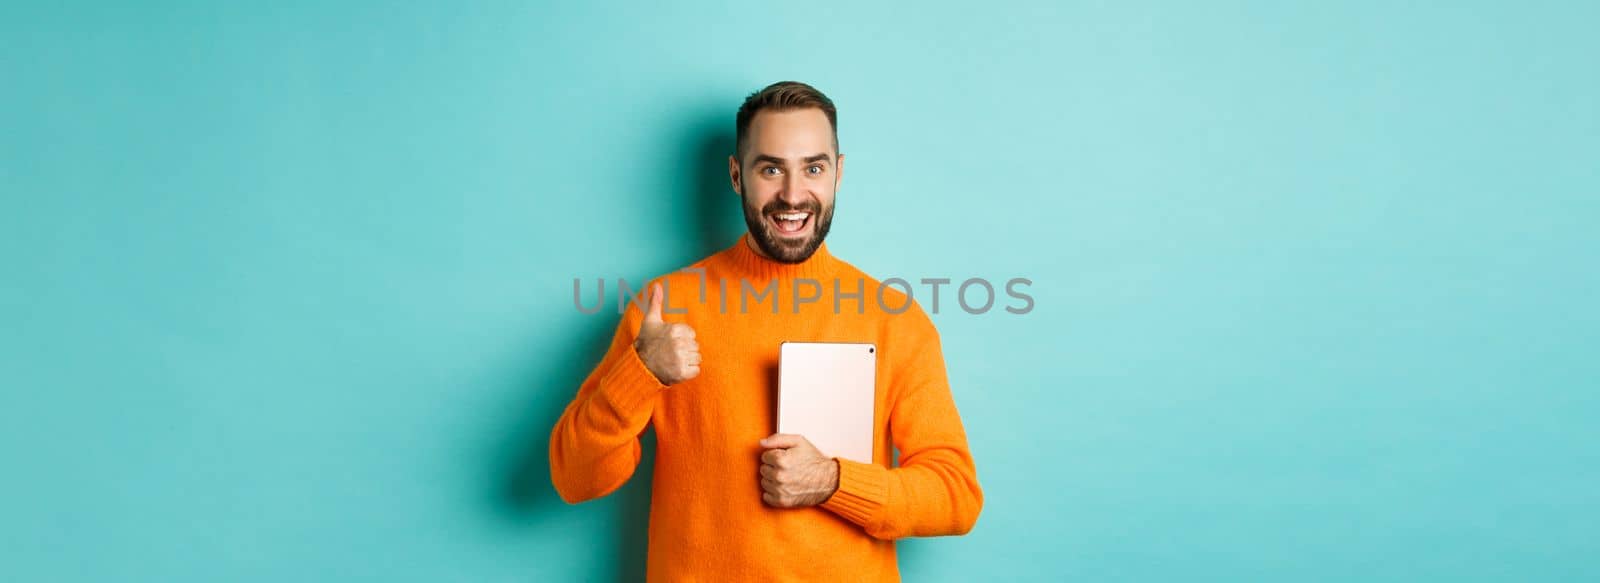 Work from home, technology concept. Handsome man holding laptop, showing thumb up, approve and like something, standing over turquoise background.